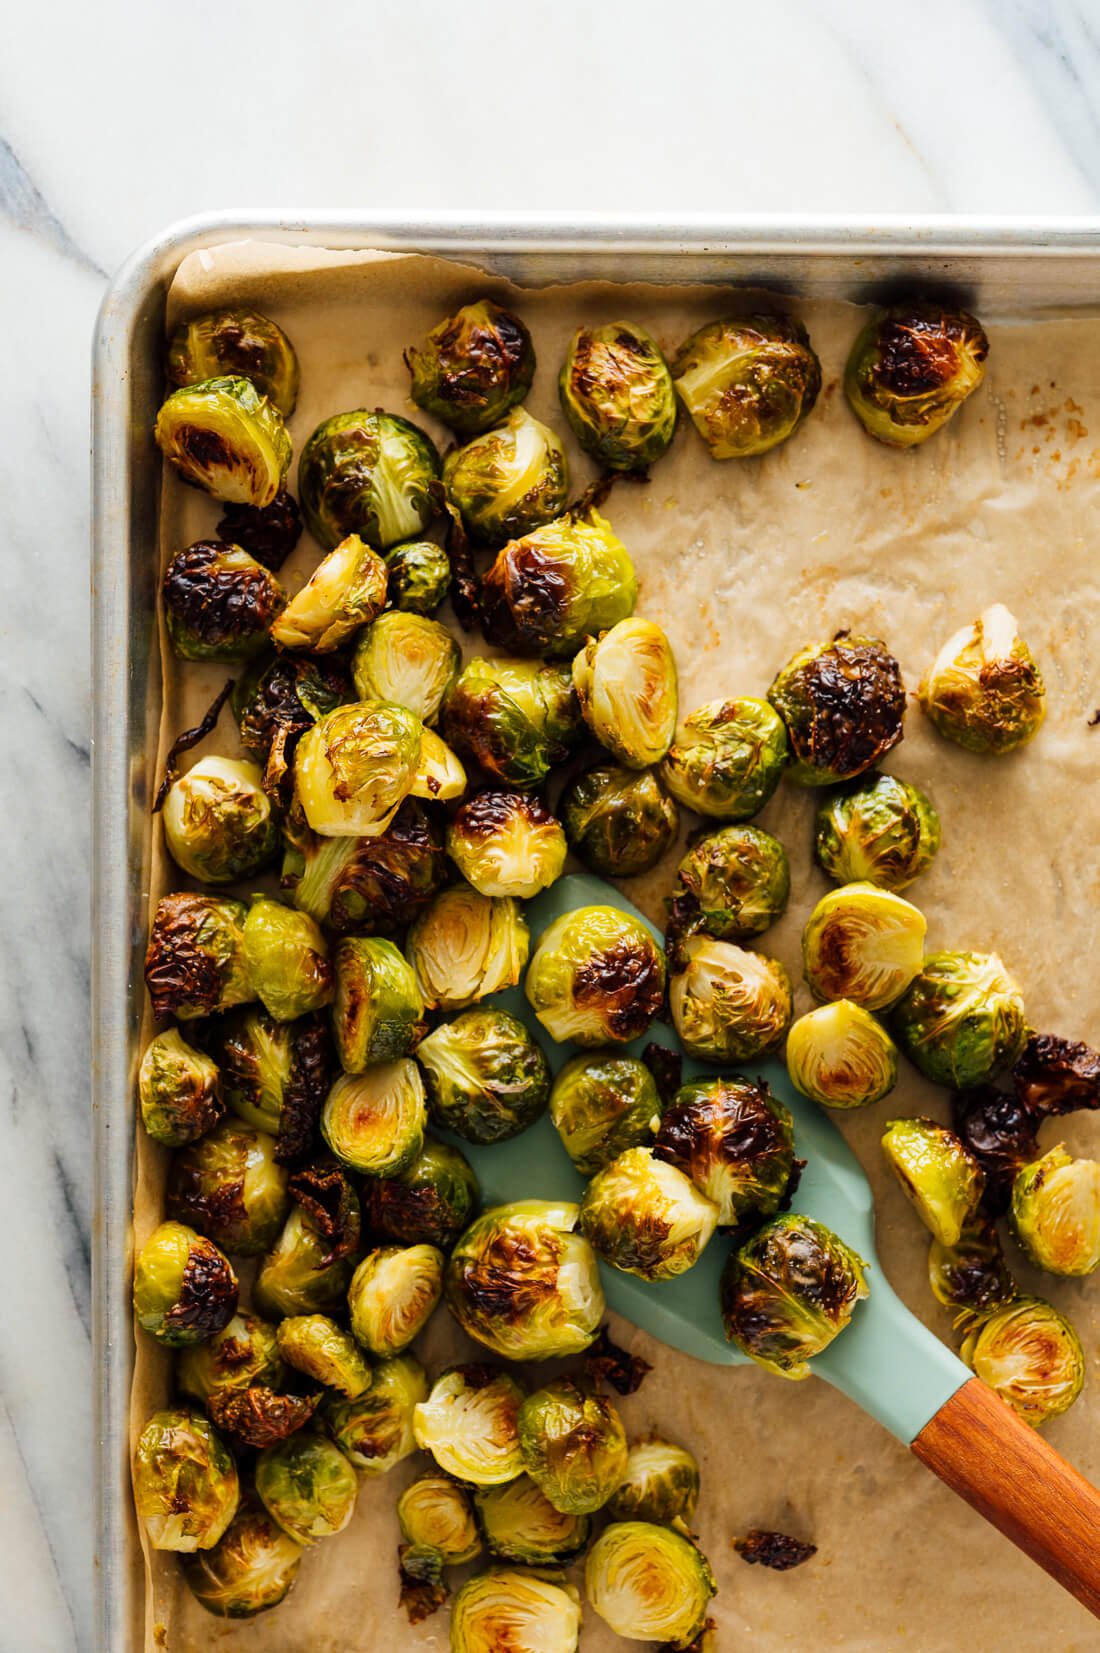 Perfect Roasted Brussels Sprouts